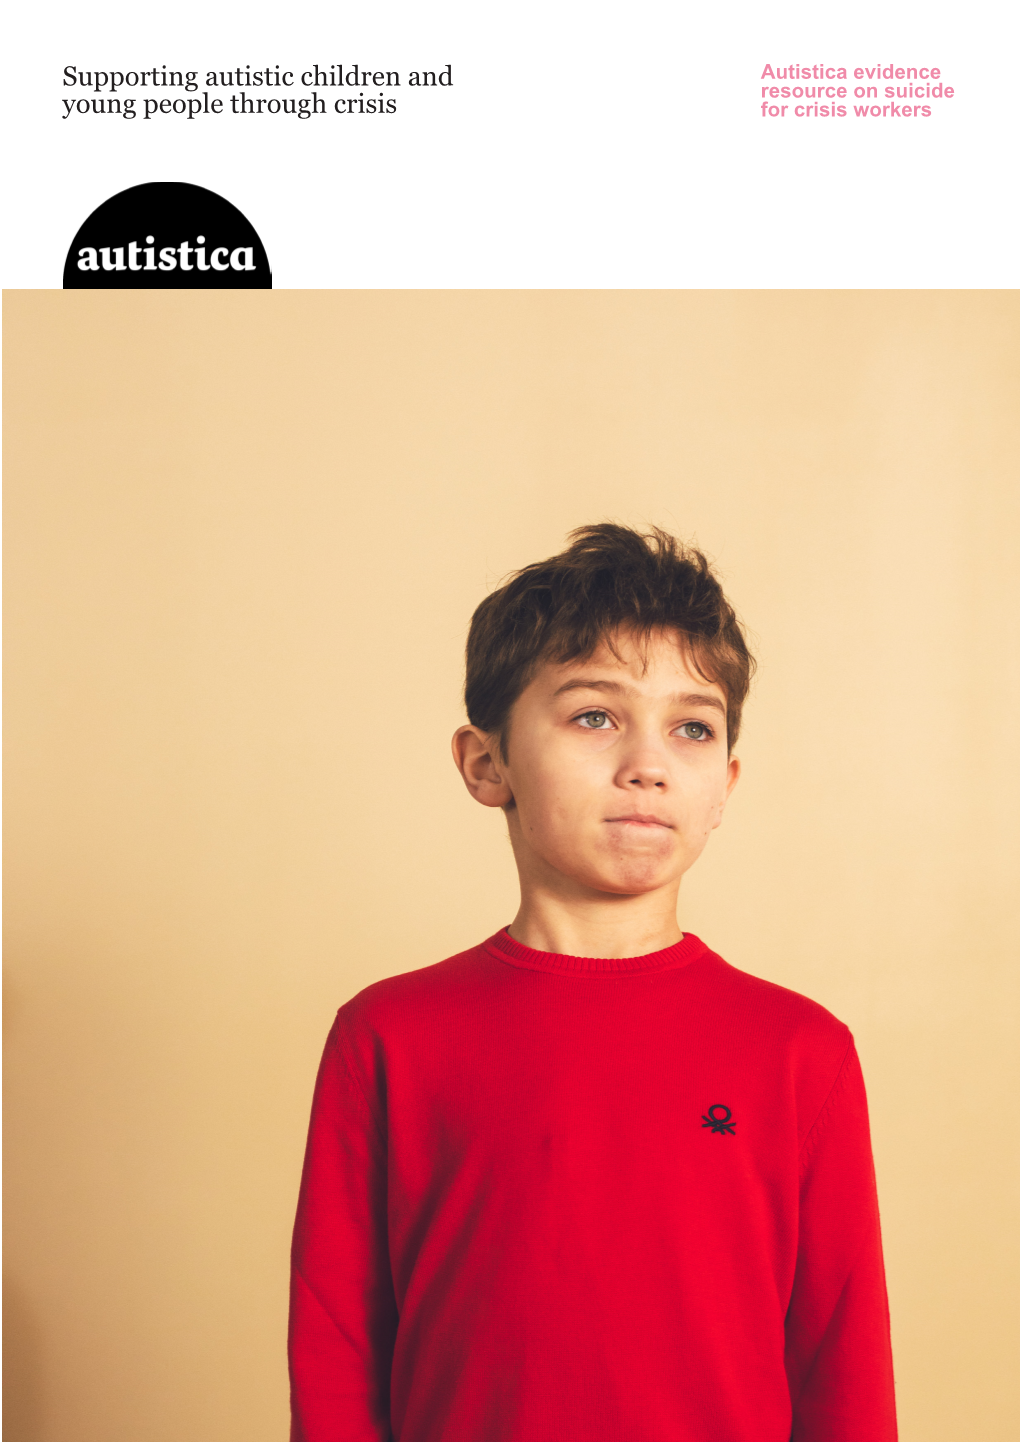 Supporting Autistic Children and Young People Through Crisis